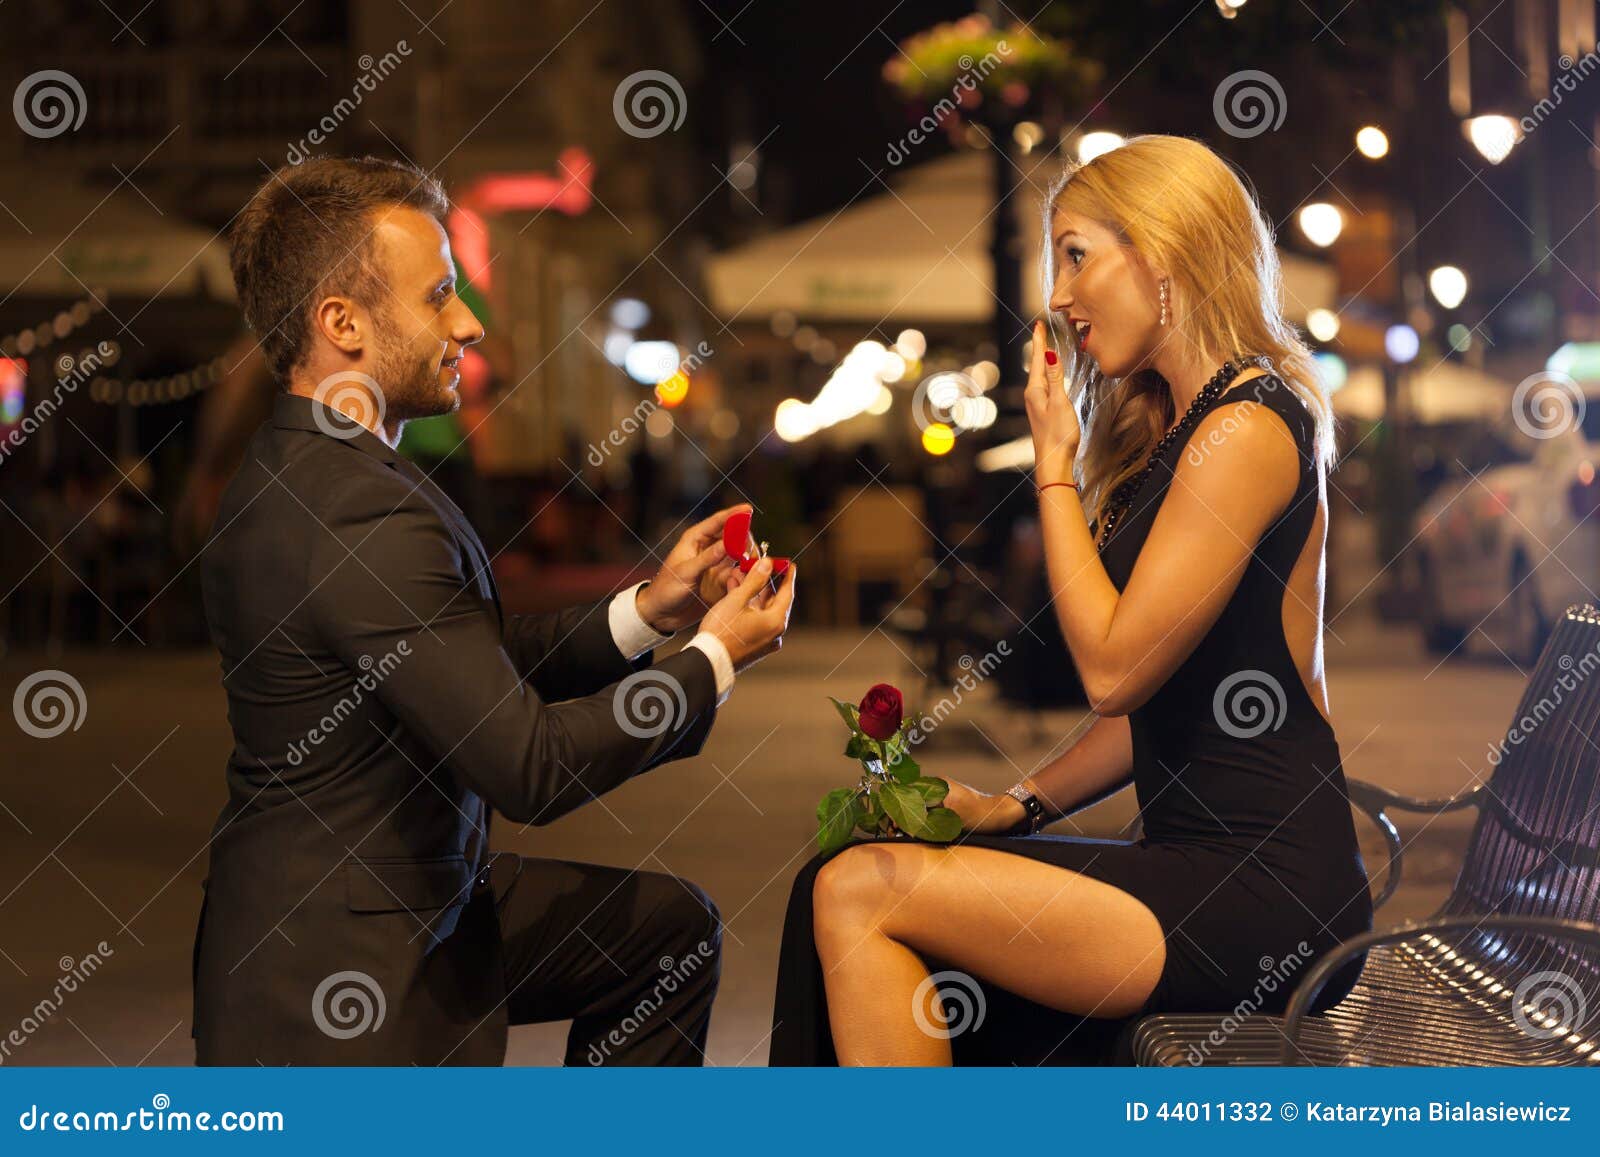 man proposing to his lover